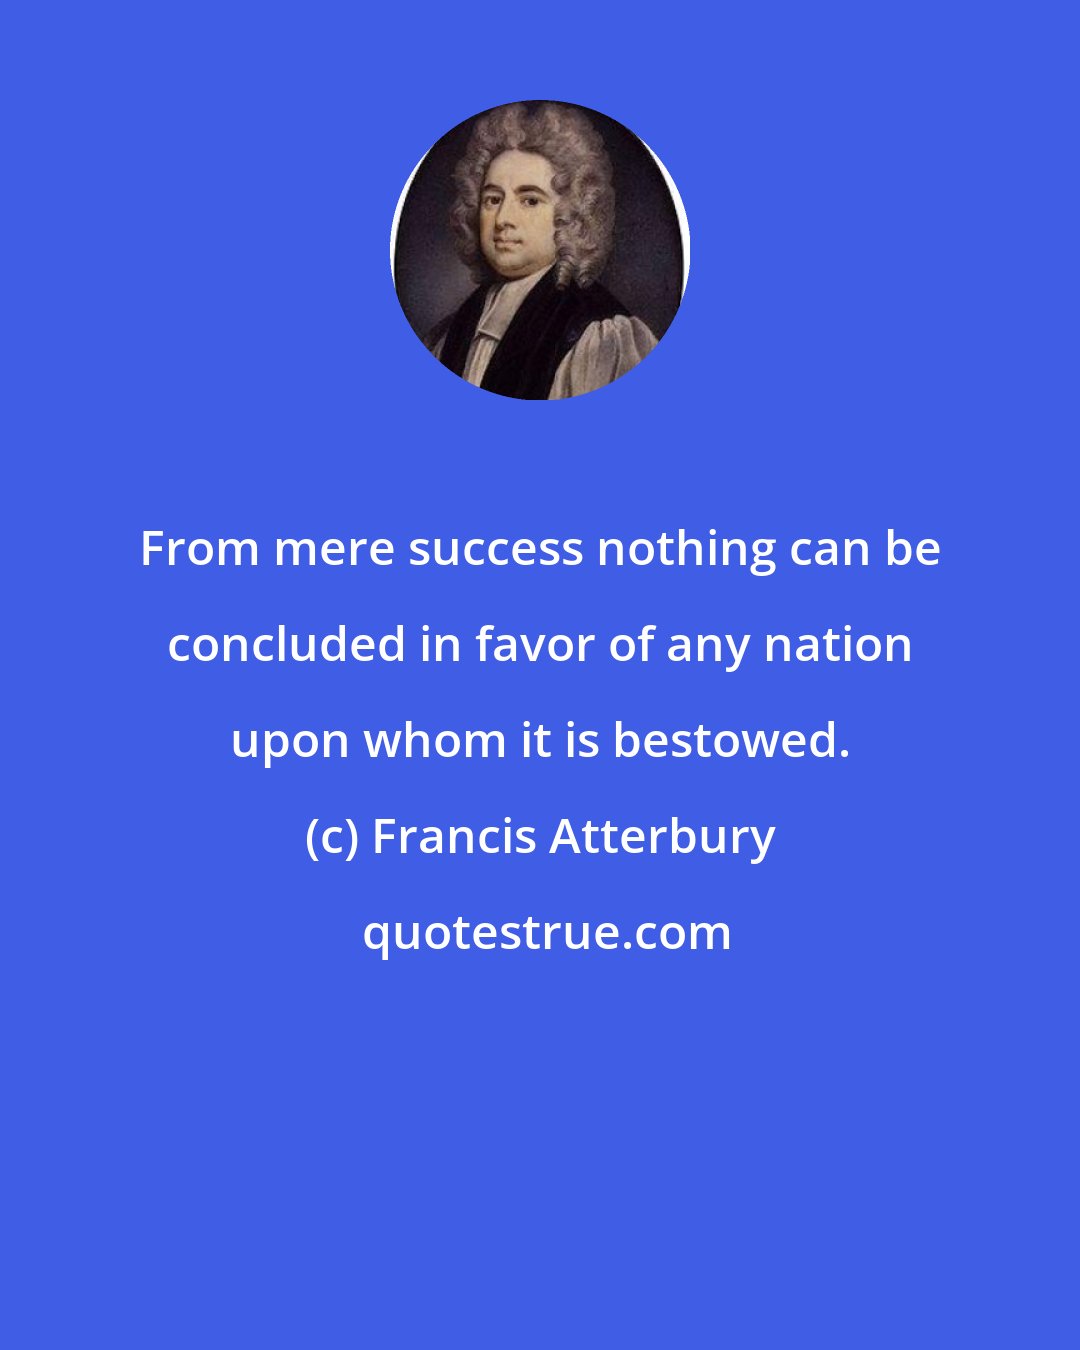 Francis Atterbury: From mere success nothing can be concluded in favor of any nation upon whom it is bestowed.